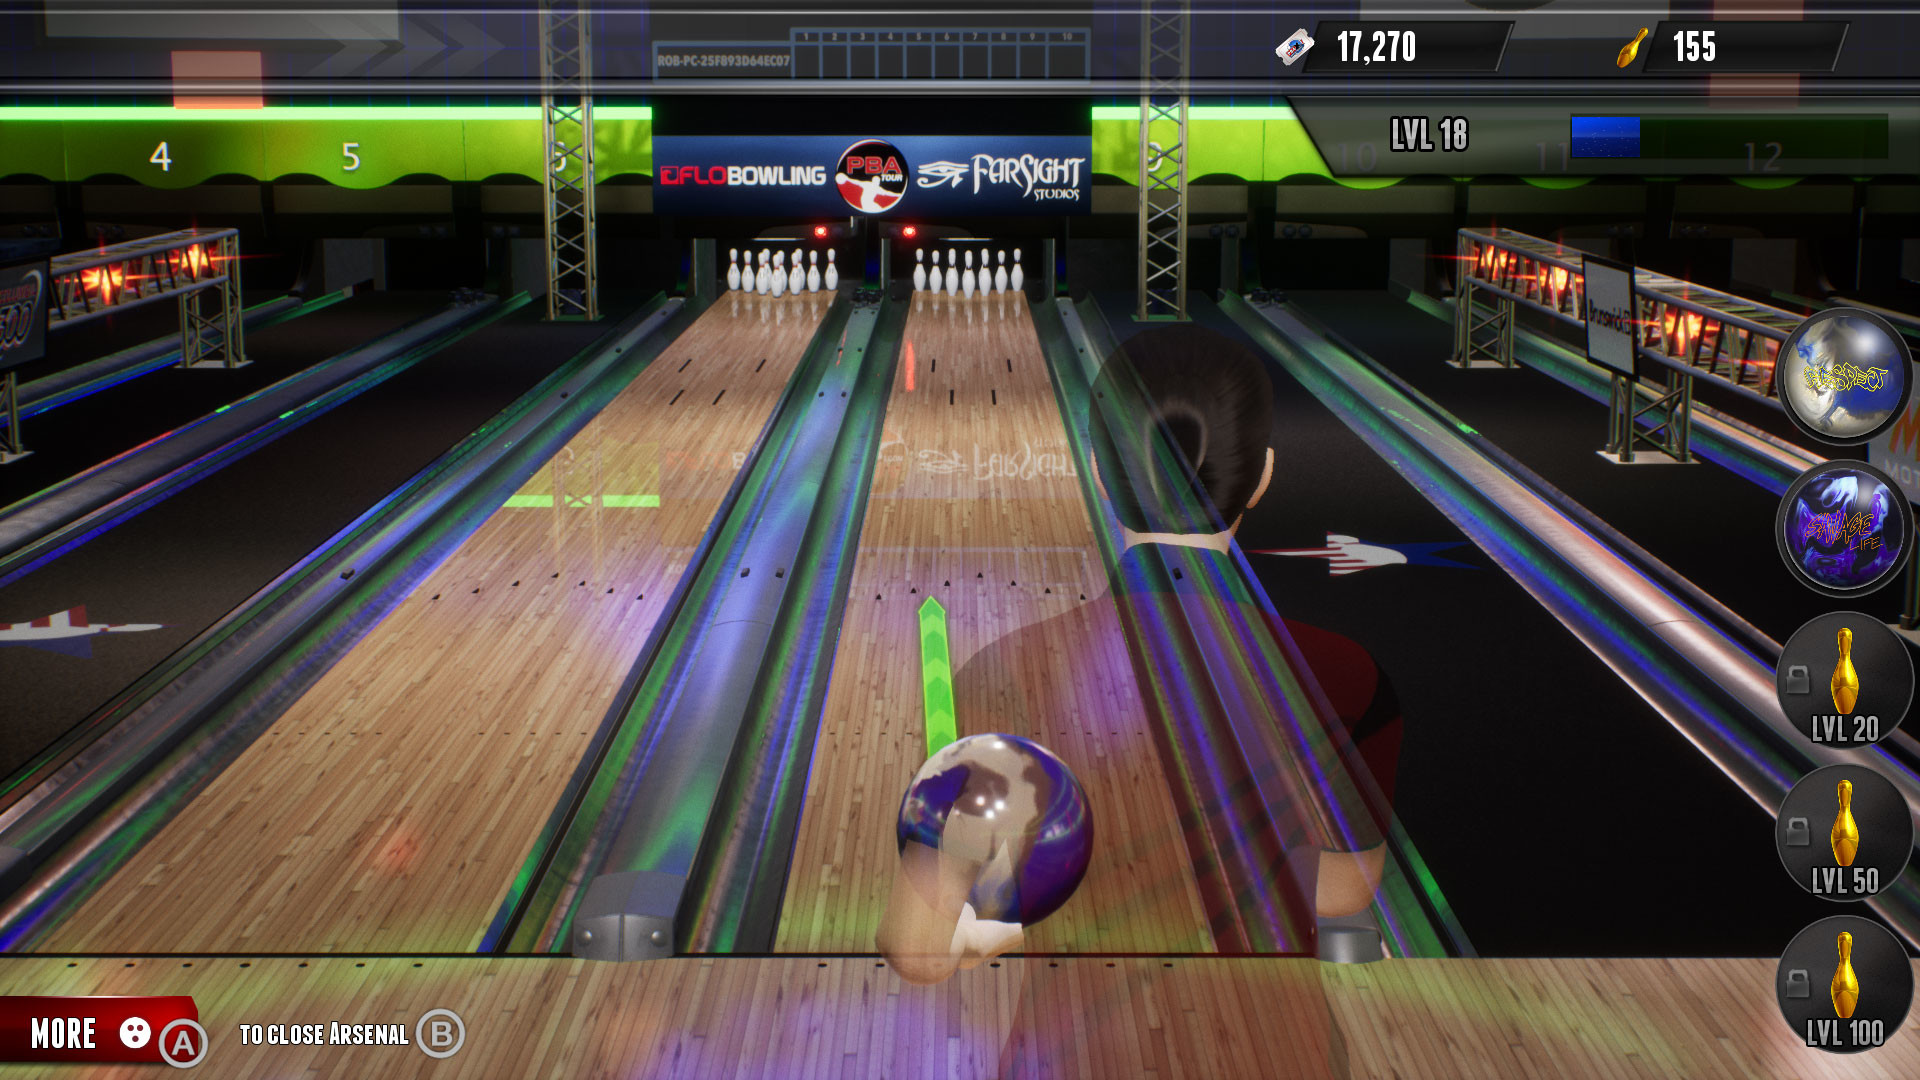 Save 60 on PBA Pro Bowling on Steam